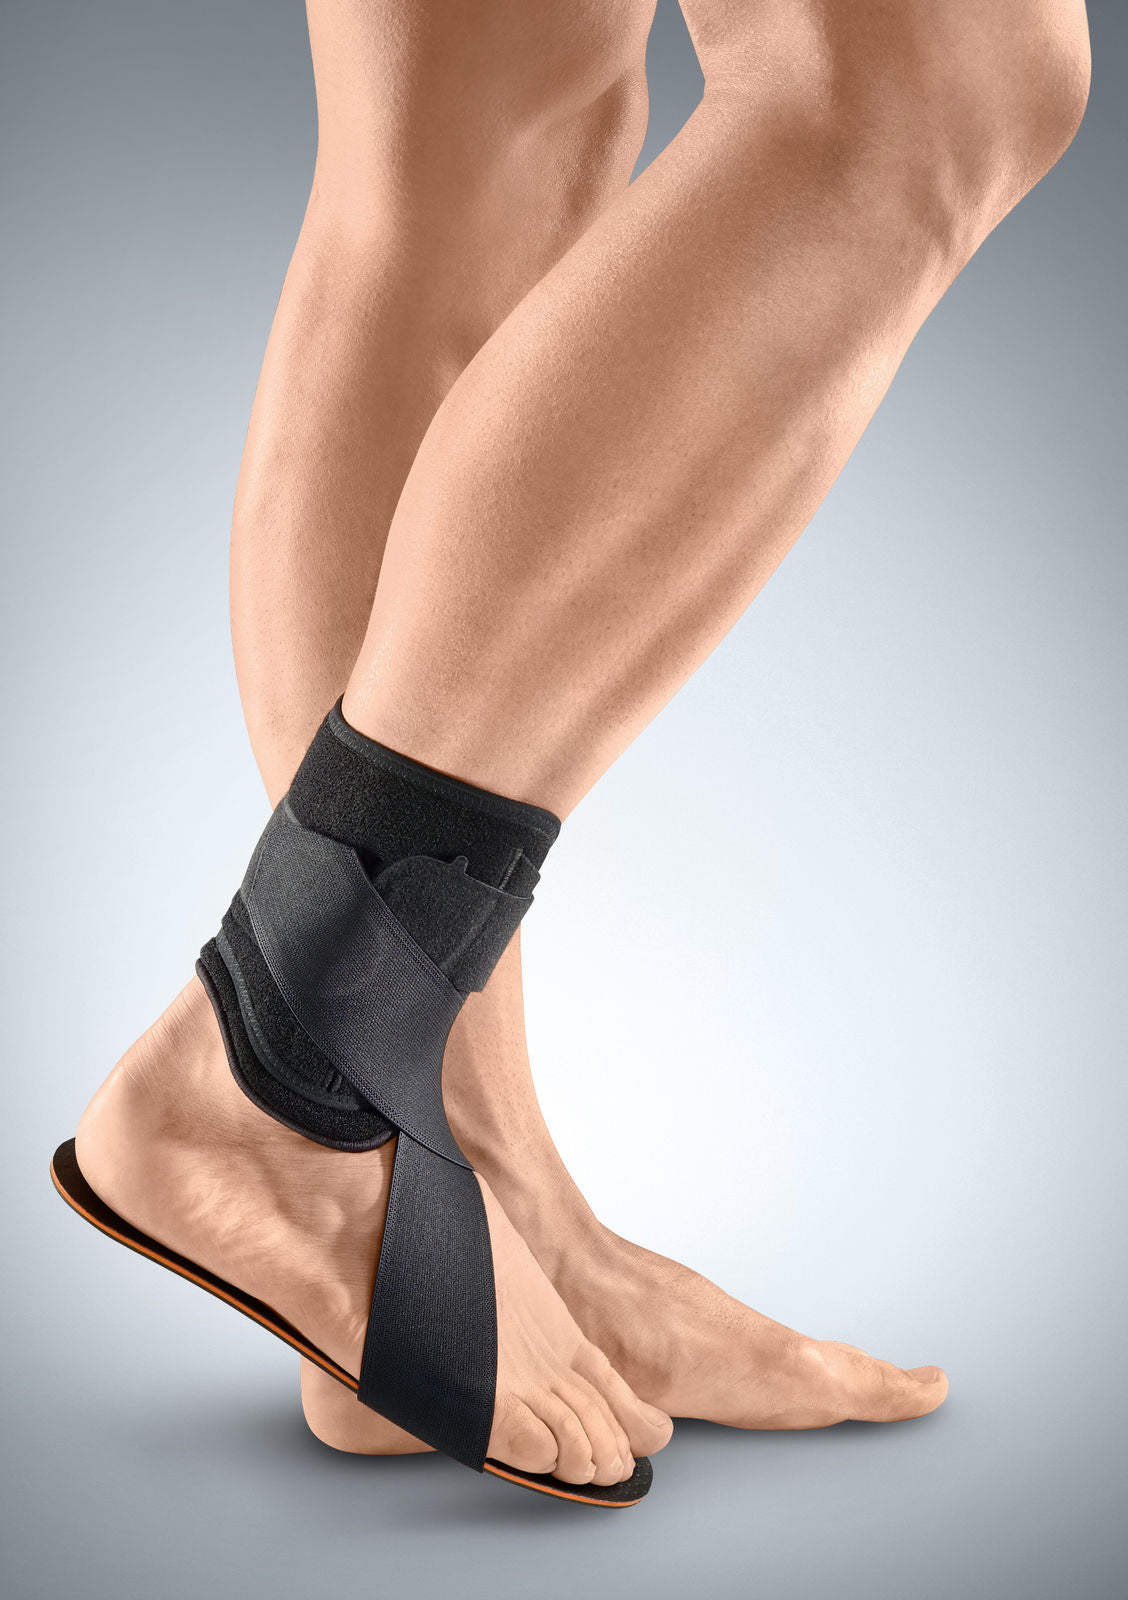 The Best Braces for Plantar Fasciitis - The Bracing Experts